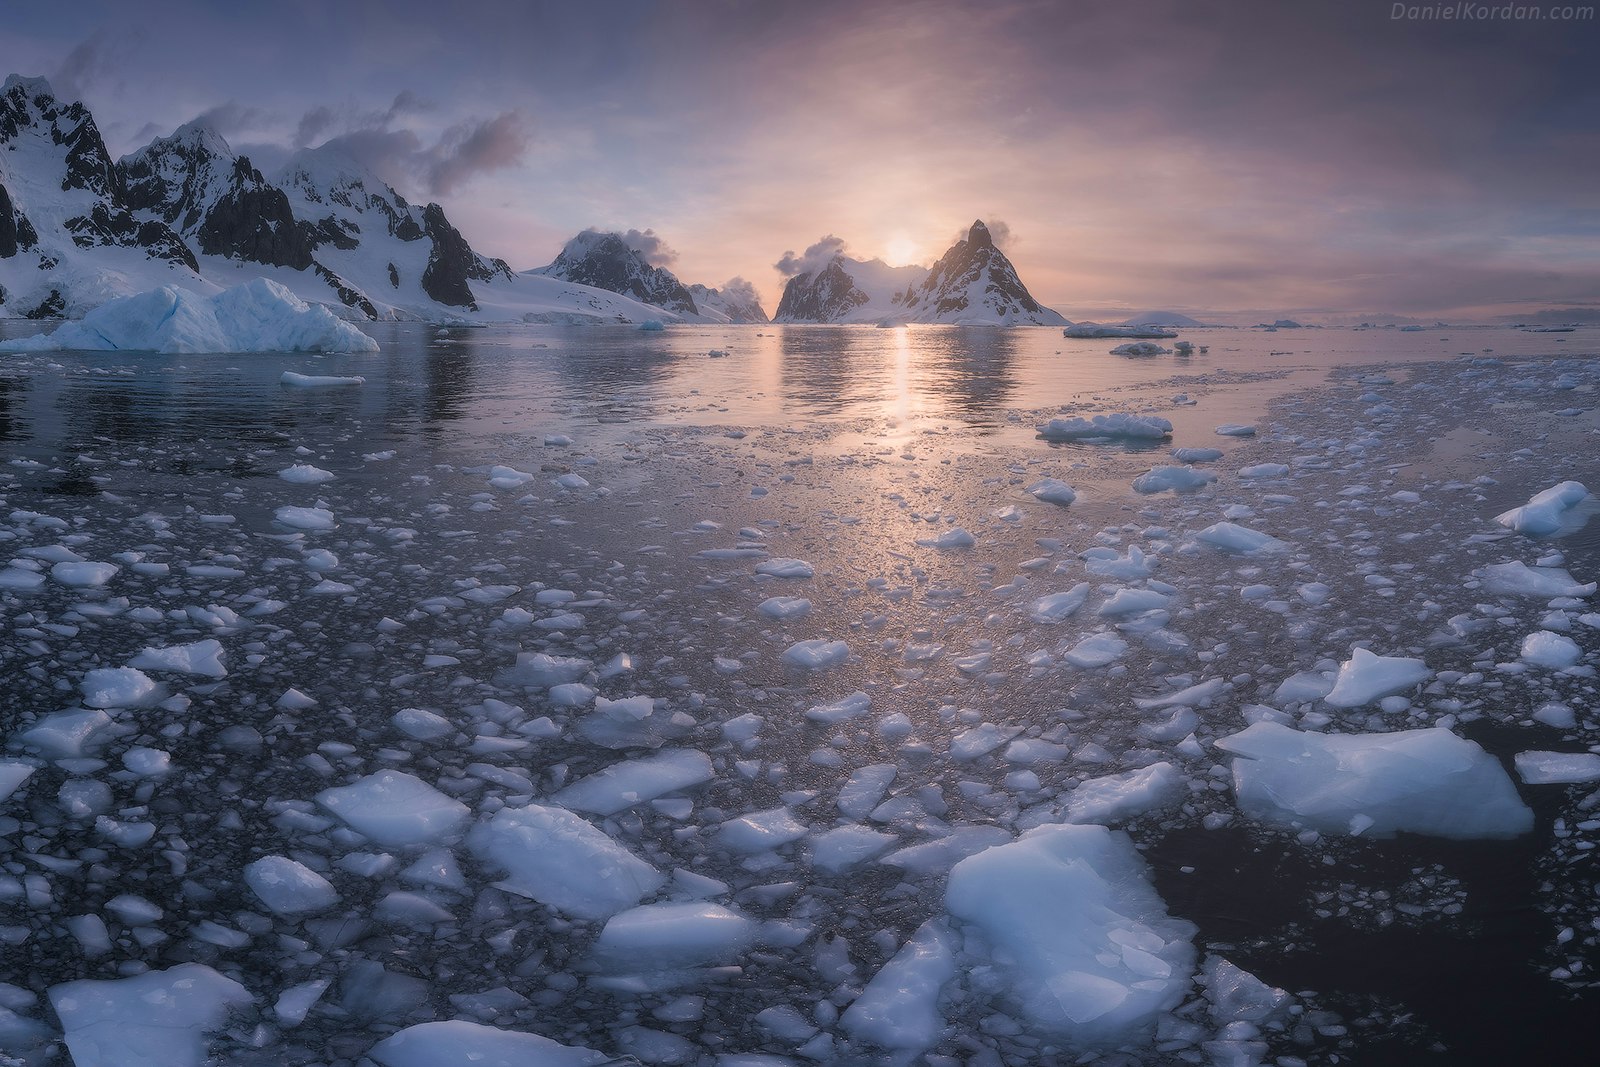 Antarctica Photography Expedition 2021 & 2022 with Daniel...